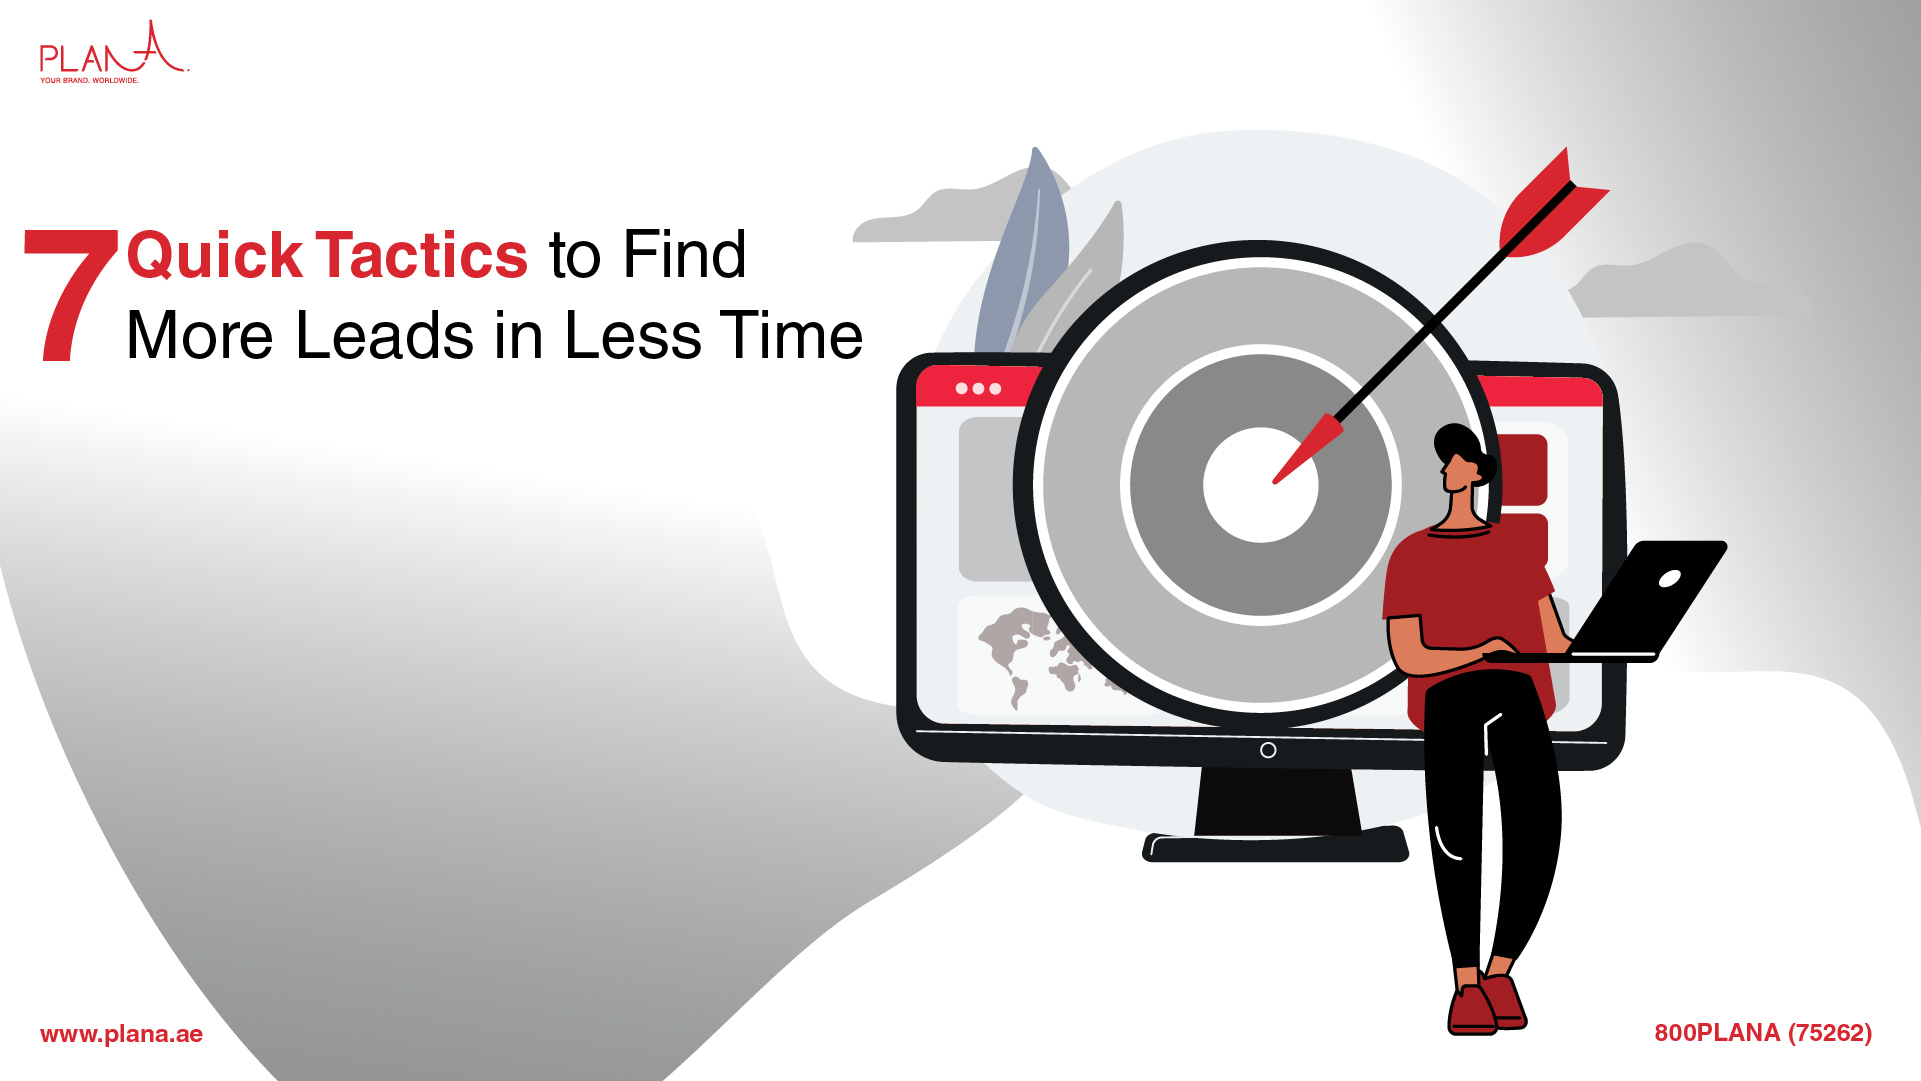 7 Quick Tactics to Find More Leads in Less Time!